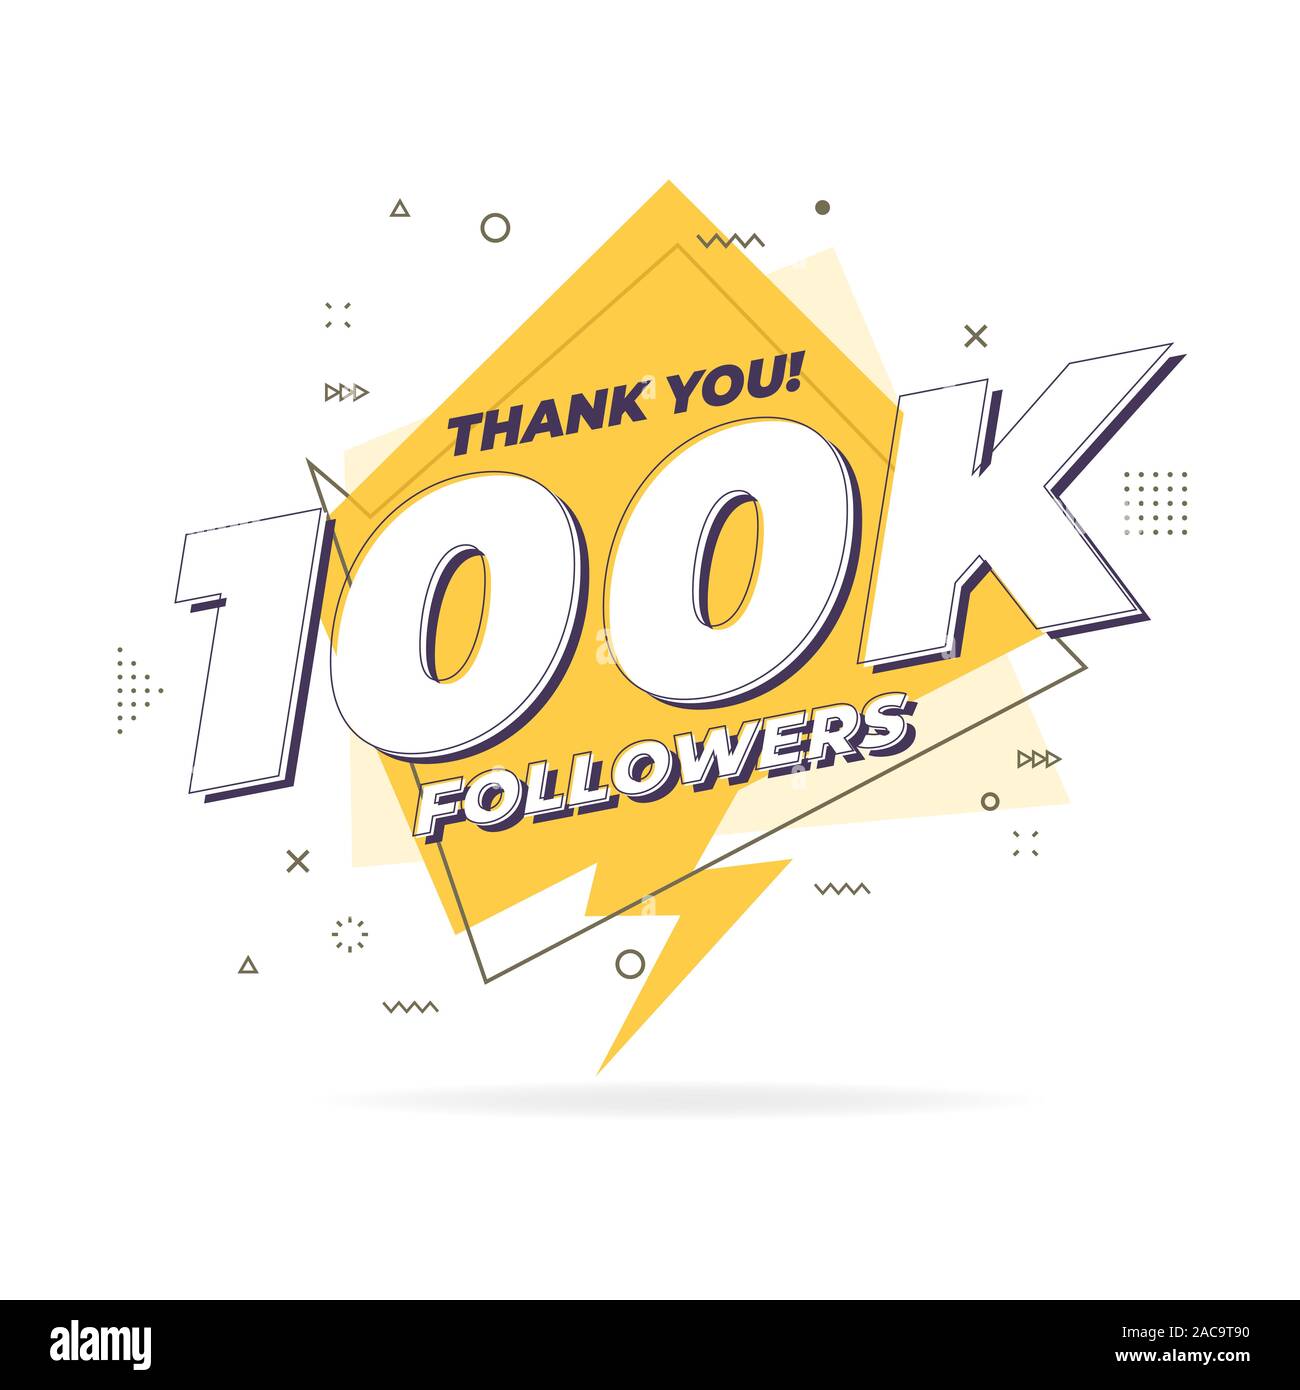 100,000 Kicked out Vector Images